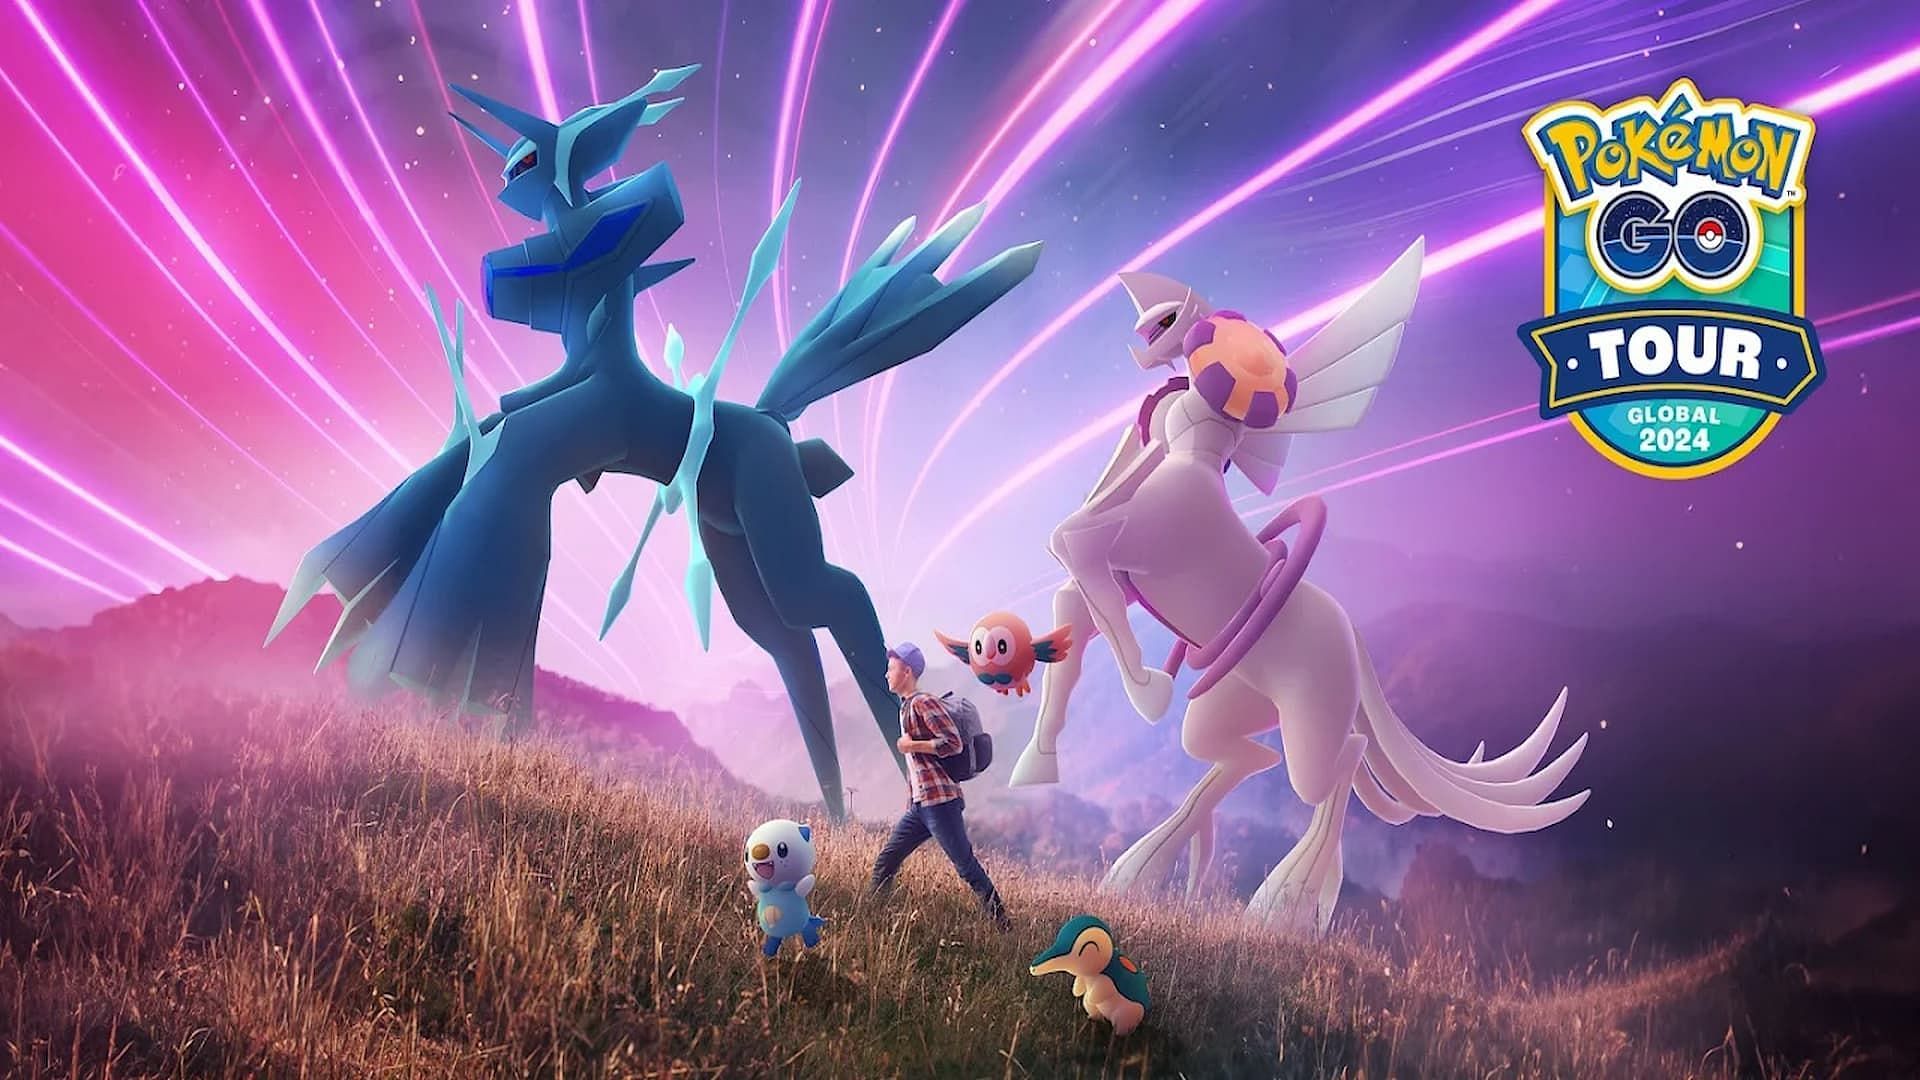 5 things to look for in Pokemon GO Tour Sinnoh